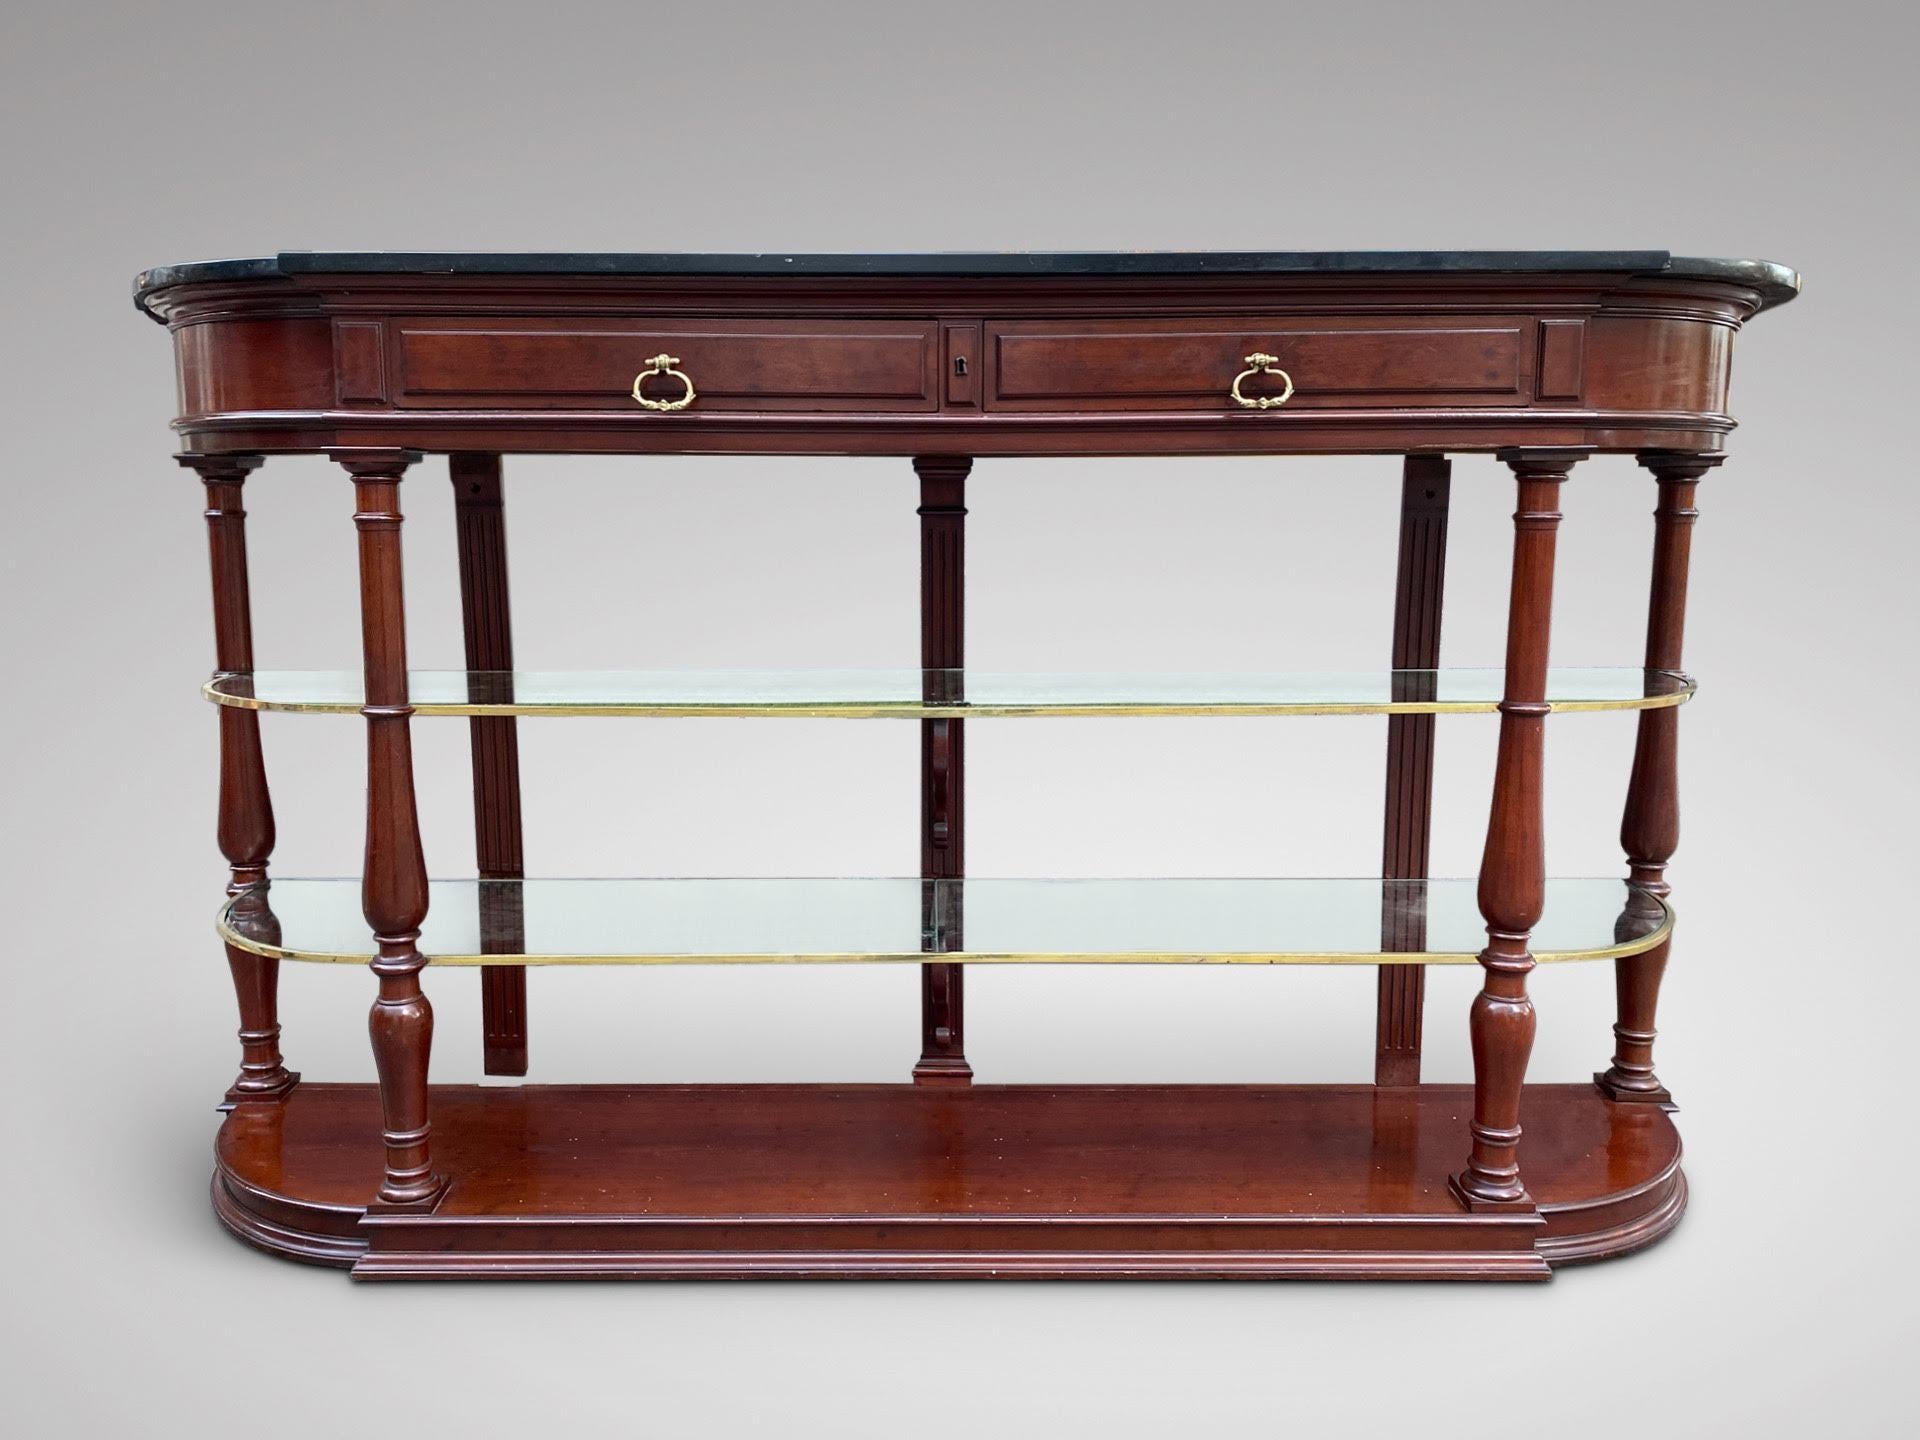 We are delighted to offer for sale this 19th century French mahogany console table with shaped black marble top above a pair of drawers with working lock, two glass shelves with brass fittings, supported by four turned supports, all standing on a